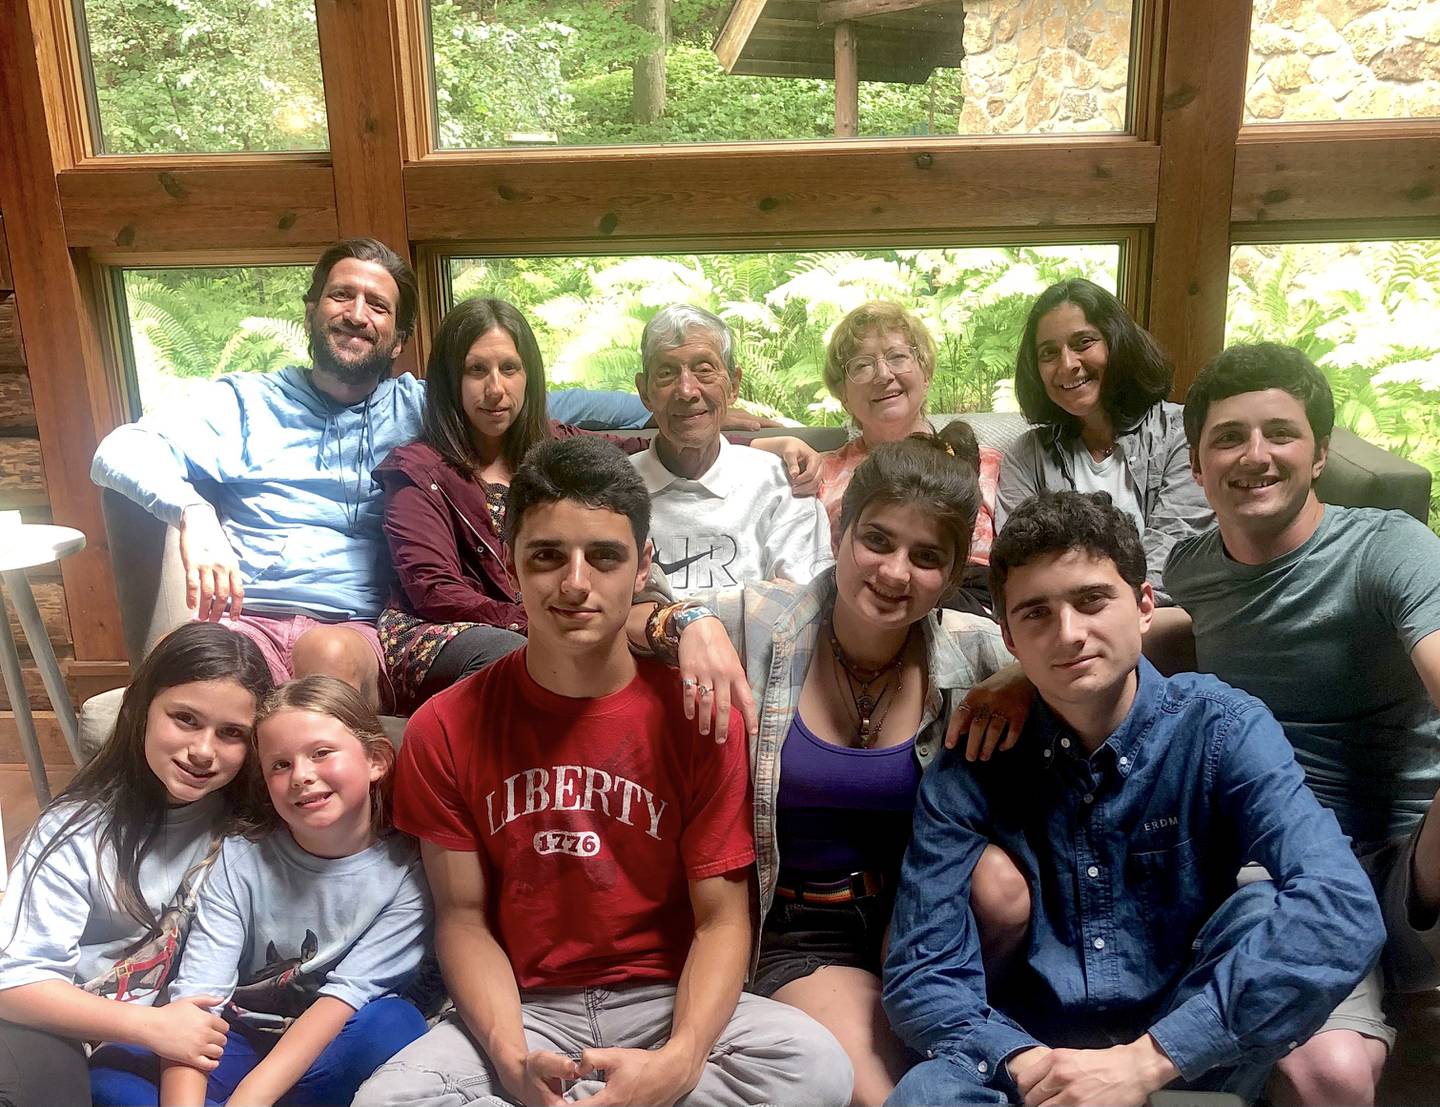 Robert “Bob” Gutierrez, formerly of Joliet and Shorewood and later Orland Park, was known for his faith, frugality, wit, kindness and strength. He is pictured the back row, center, with his grandchildren in the front row. To his left is his wife Barbara Jean and then his daughter Elena Byrne. To his right is son David Gutierrez and David's wife Nikki. Elena's husband Michael is not pictured.